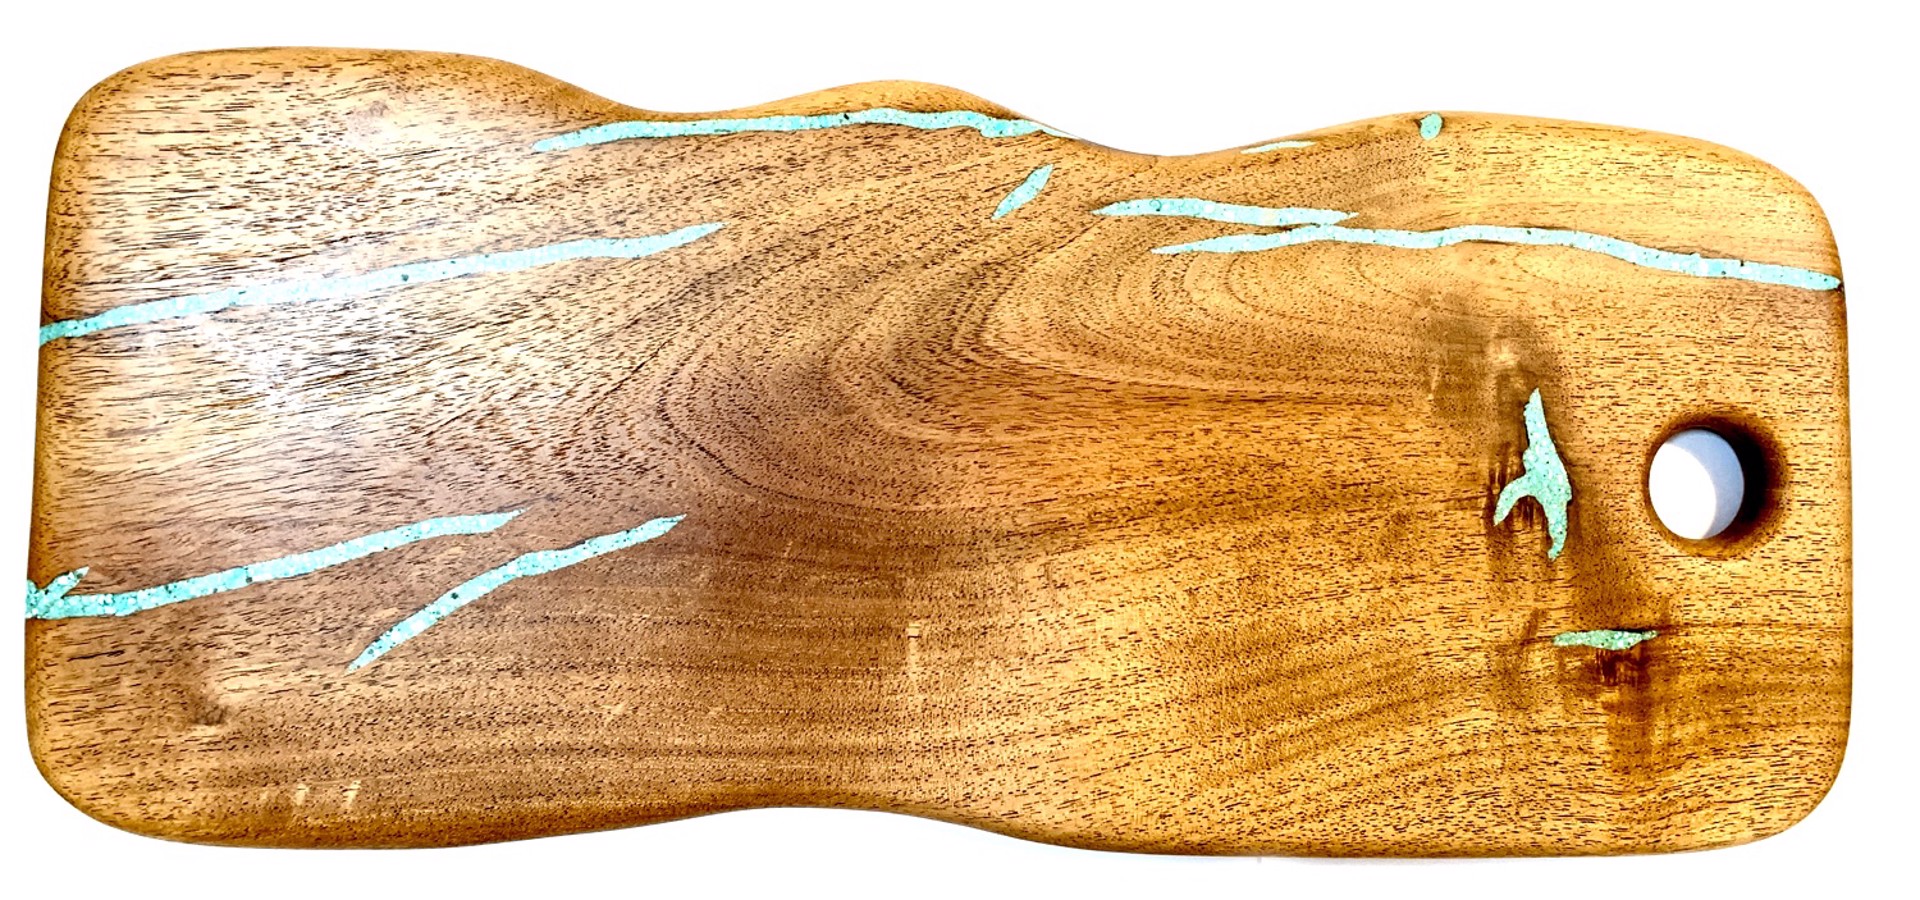 Cutting Board - Mesquite with Turquoise Inlay by TreeStump Woodcraft